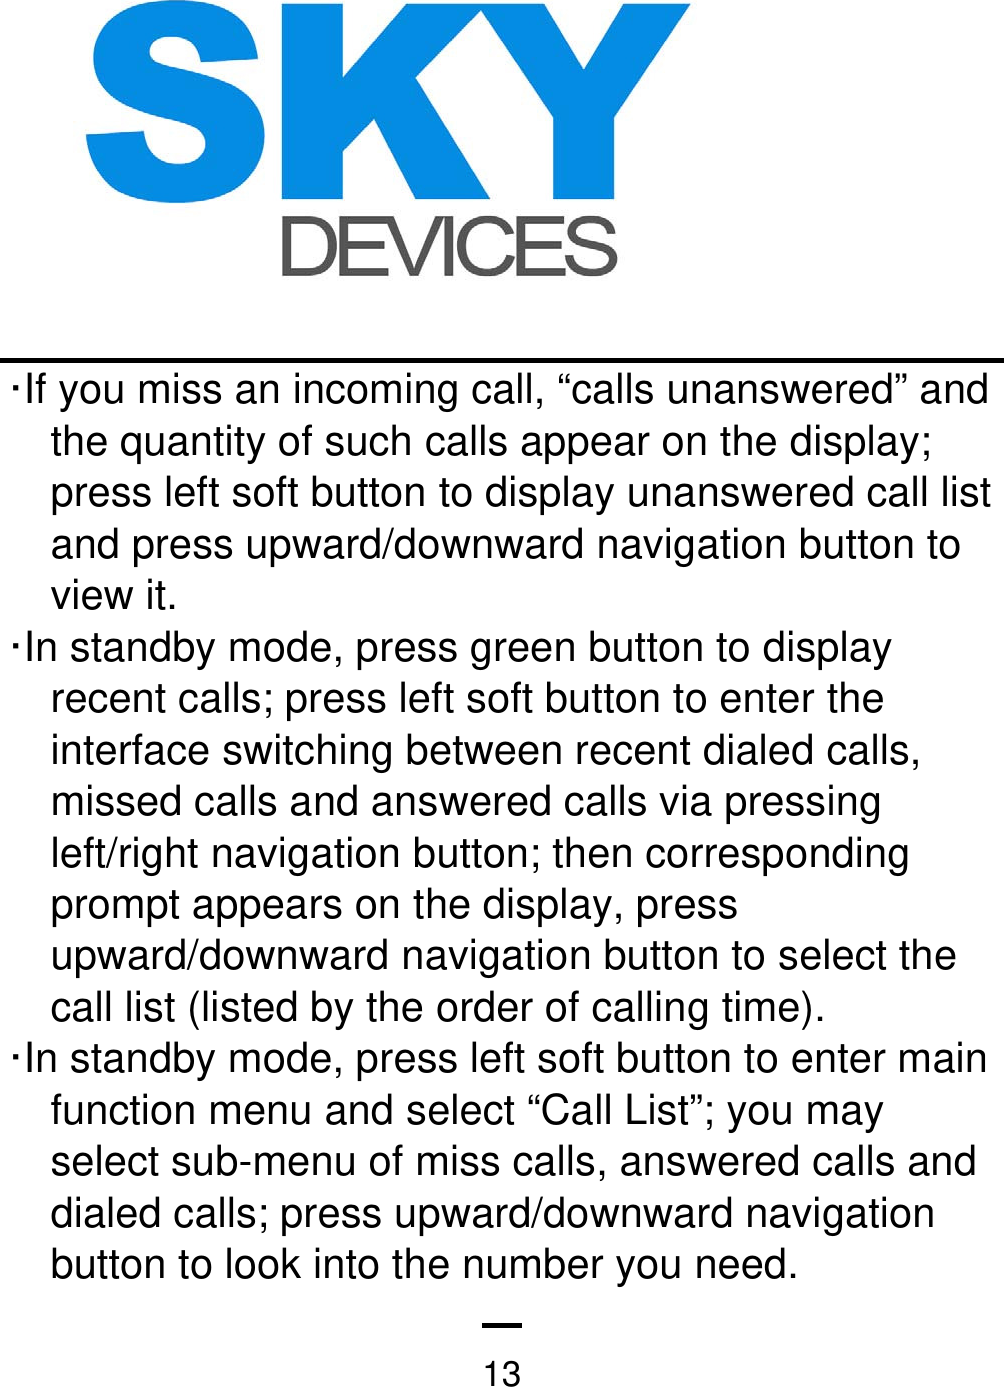   13·If you miss an incoming call, “calls unanswered” and the quantity of such calls appear on the display; press left soft button to display unanswered call list and press upward/downward navigation button to view it.   ·In standby mode, press green button to display recent calls; press left soft button to enter the interface switching between recent dialed calls, missed calls and answered calls via pressing left/right navigation button; then corresponding prompt appears on the display, press upward/downward navigation button to select the call list (listed by the order of calling time). ·In standby mode, press left soft button to enter main function menu and select “Call List”; you may select sub-menu of miss calls, answered calls and dialed calls; press upward/downward navigation button to look into the number you need.     